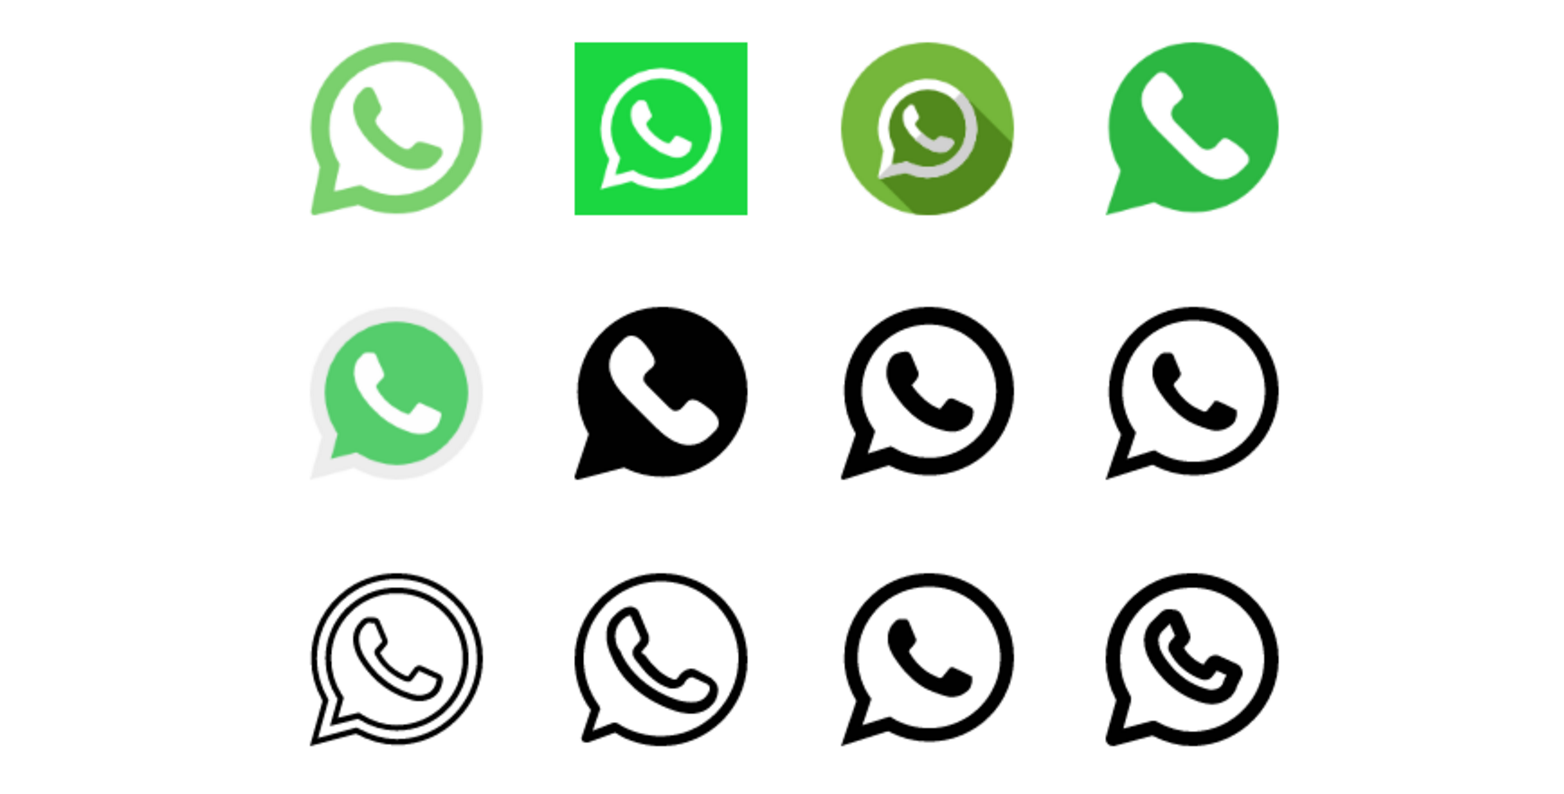 WhatsApp for BlackBerry 10 gets updated with Hub icon support and 